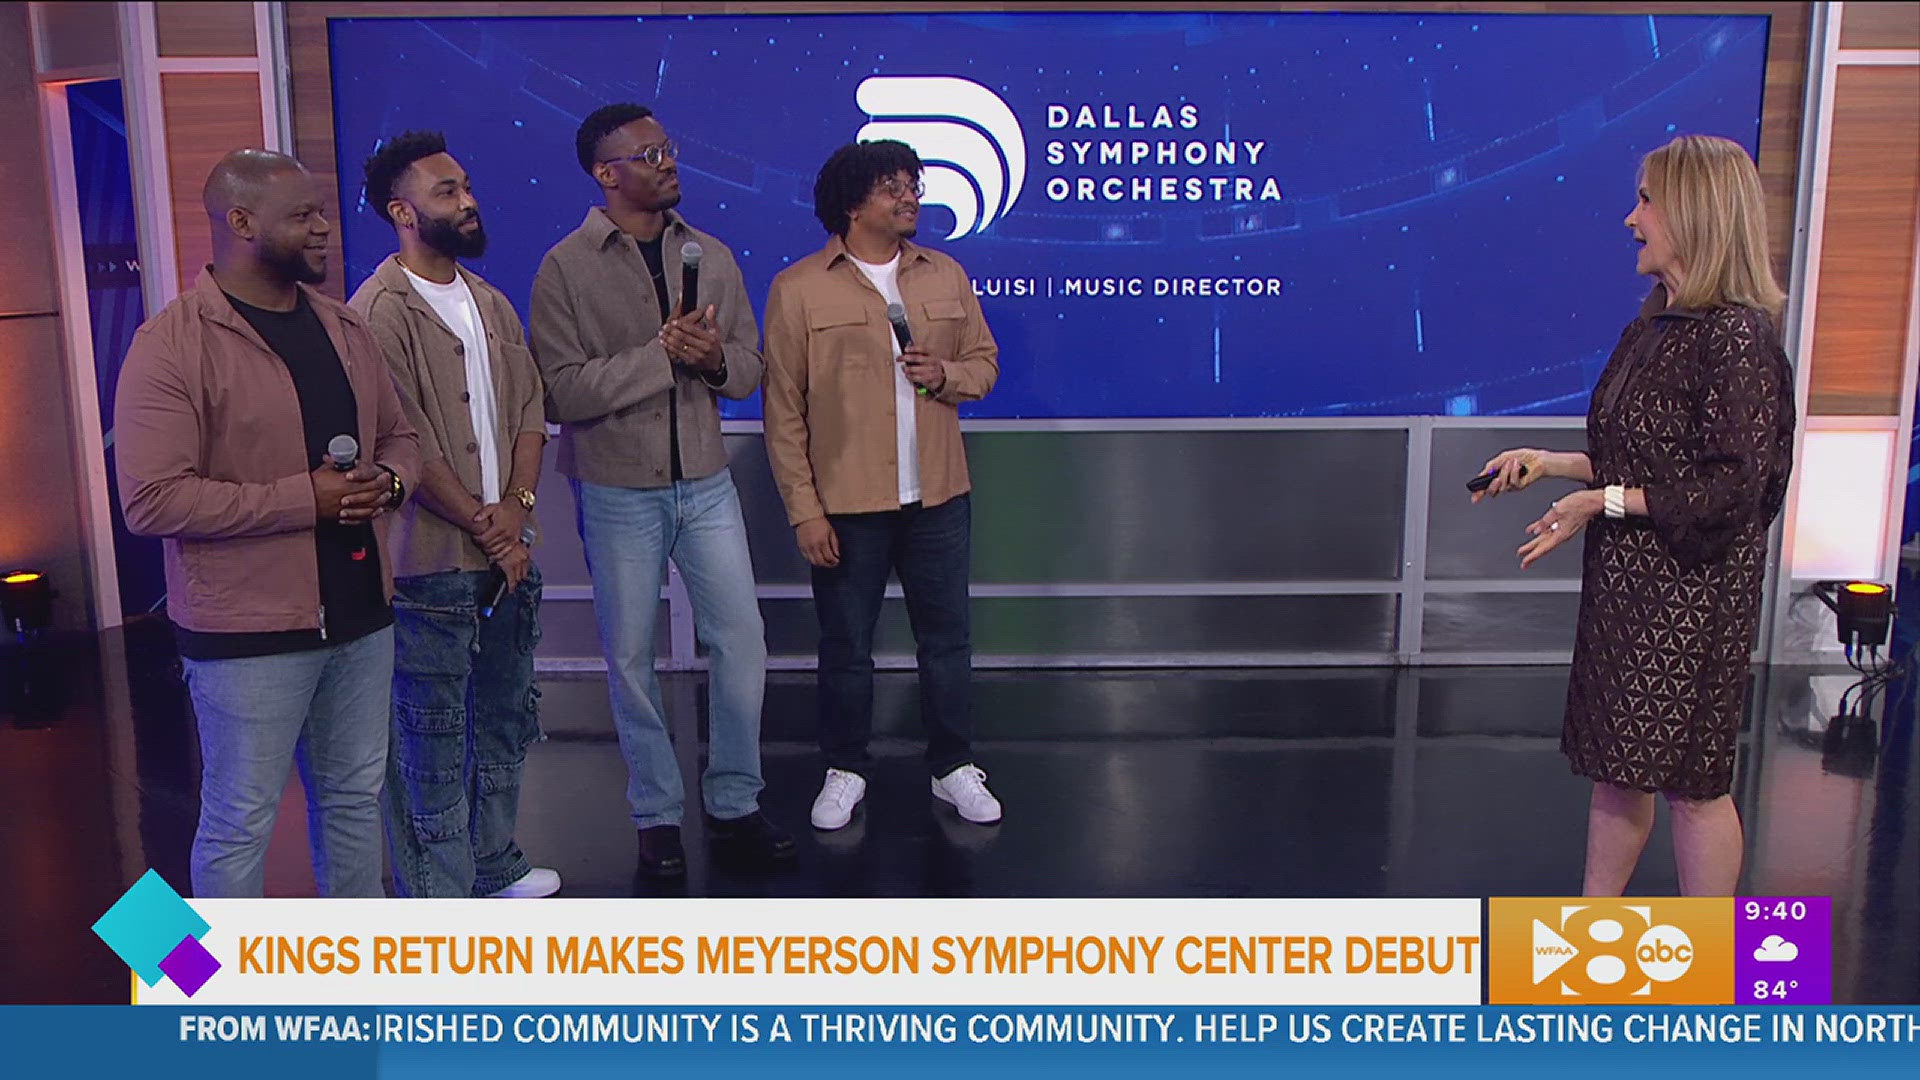 Kings Return is taking the stage at the Meyerson with a free concert! We get a preview from the local acapella group before they take the stage.